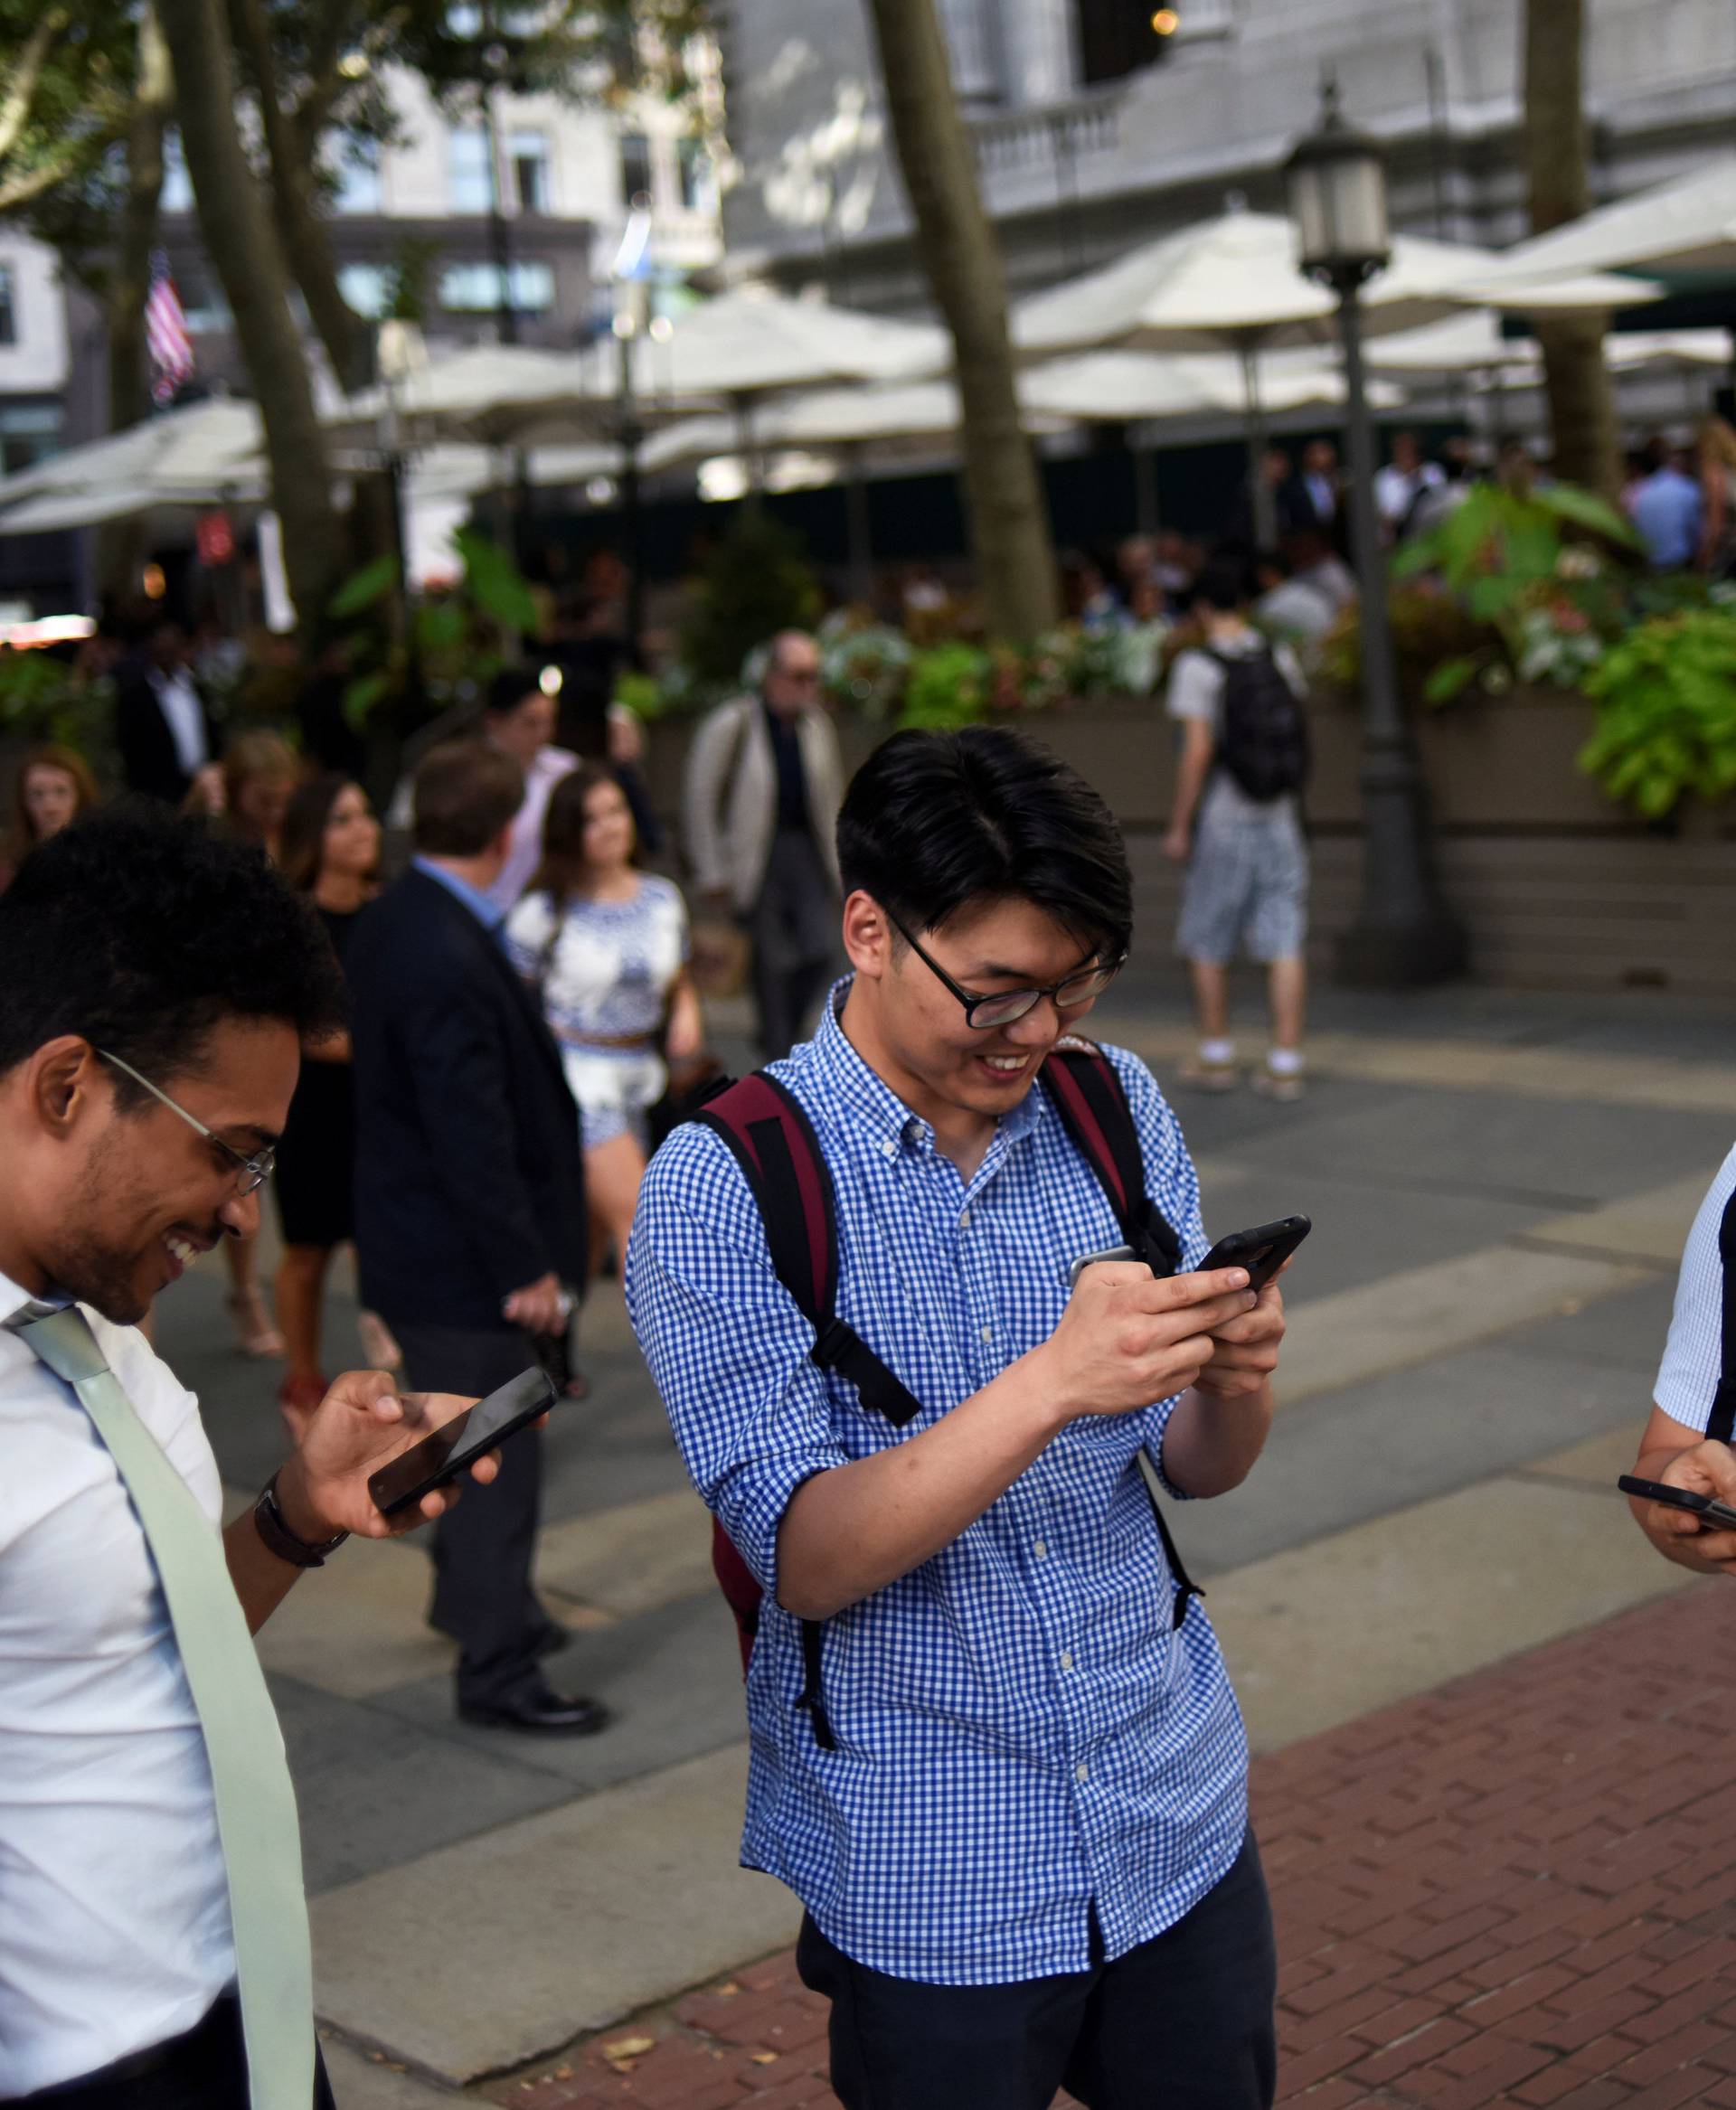 People play the augmented reality mobile game "Pokemon Go" by Nintendo in New York City